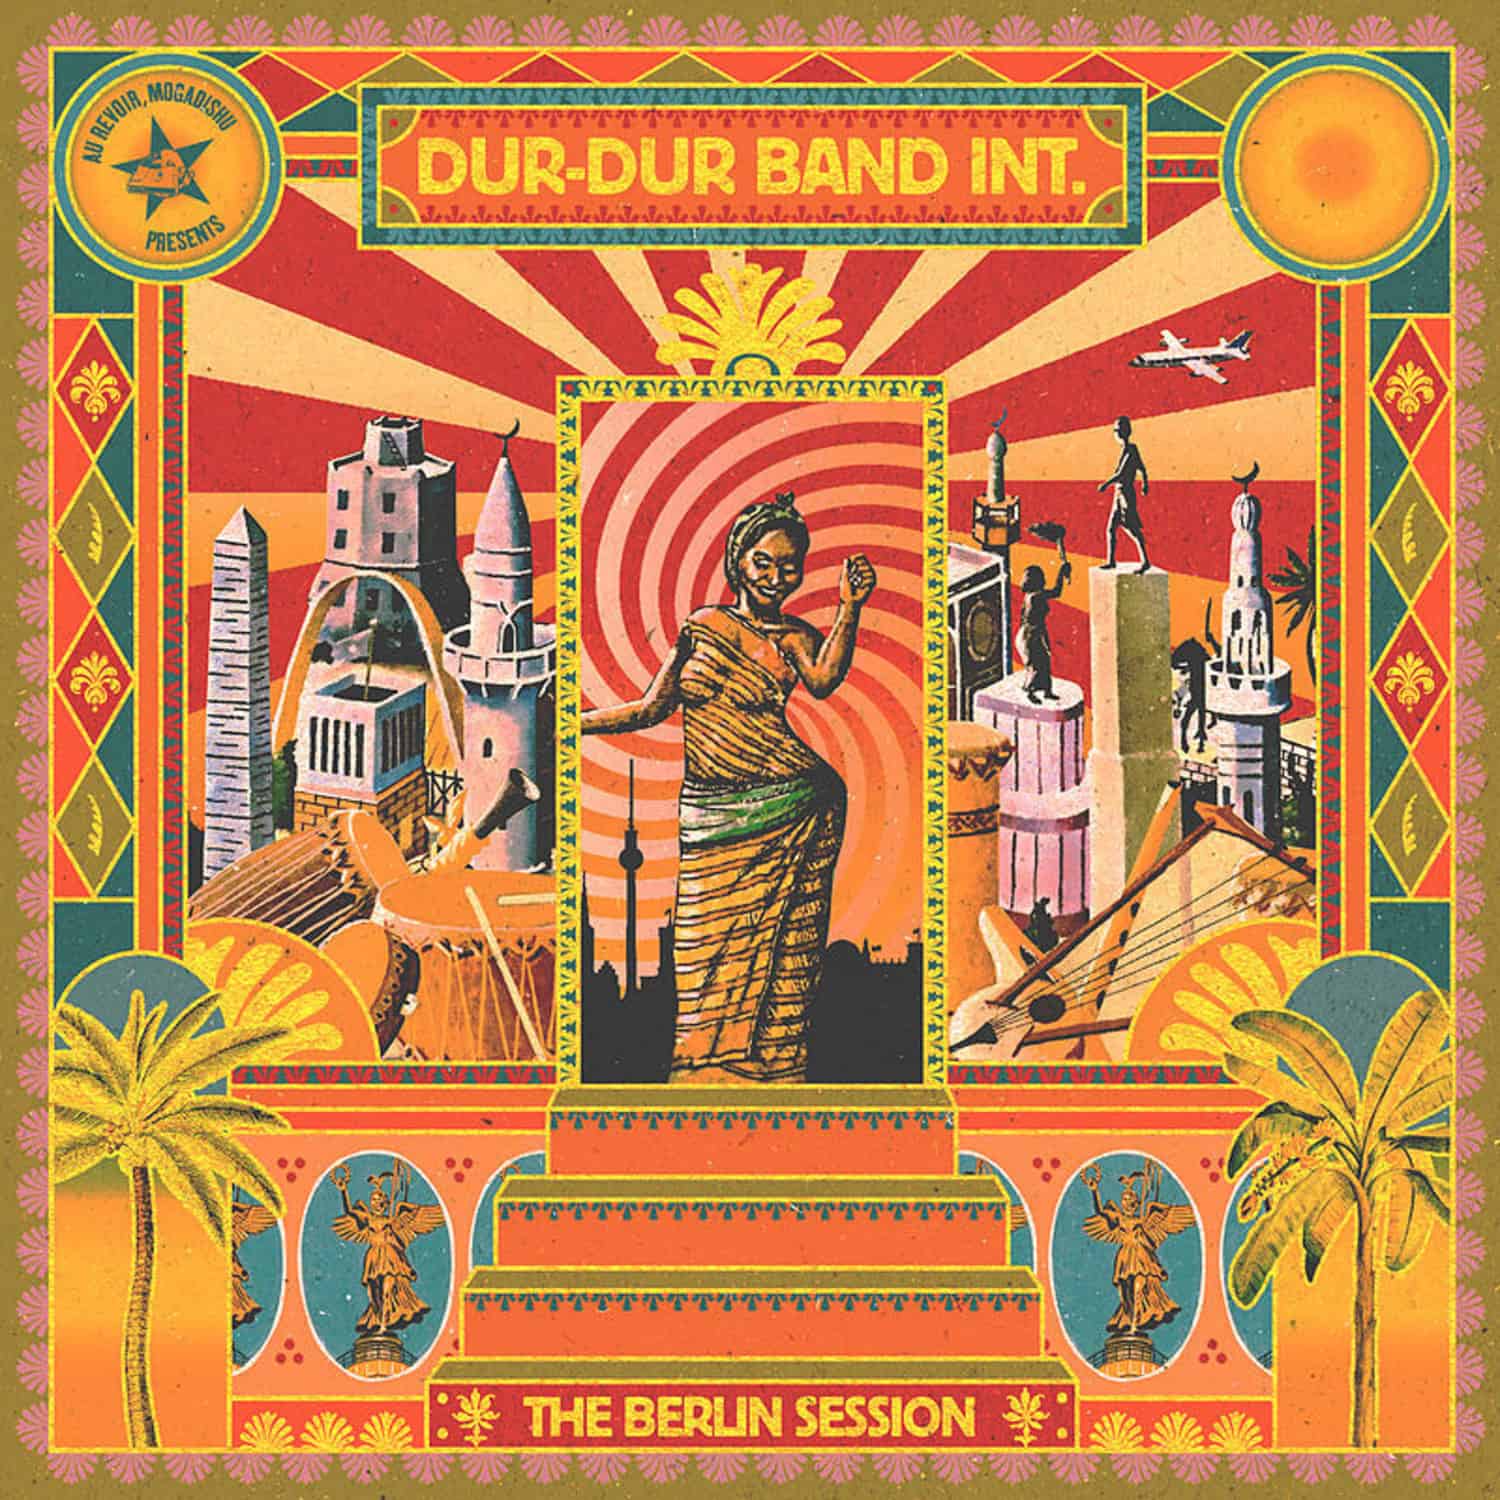 Dur-Dur Band Int. - THE BERLIN SESSION 